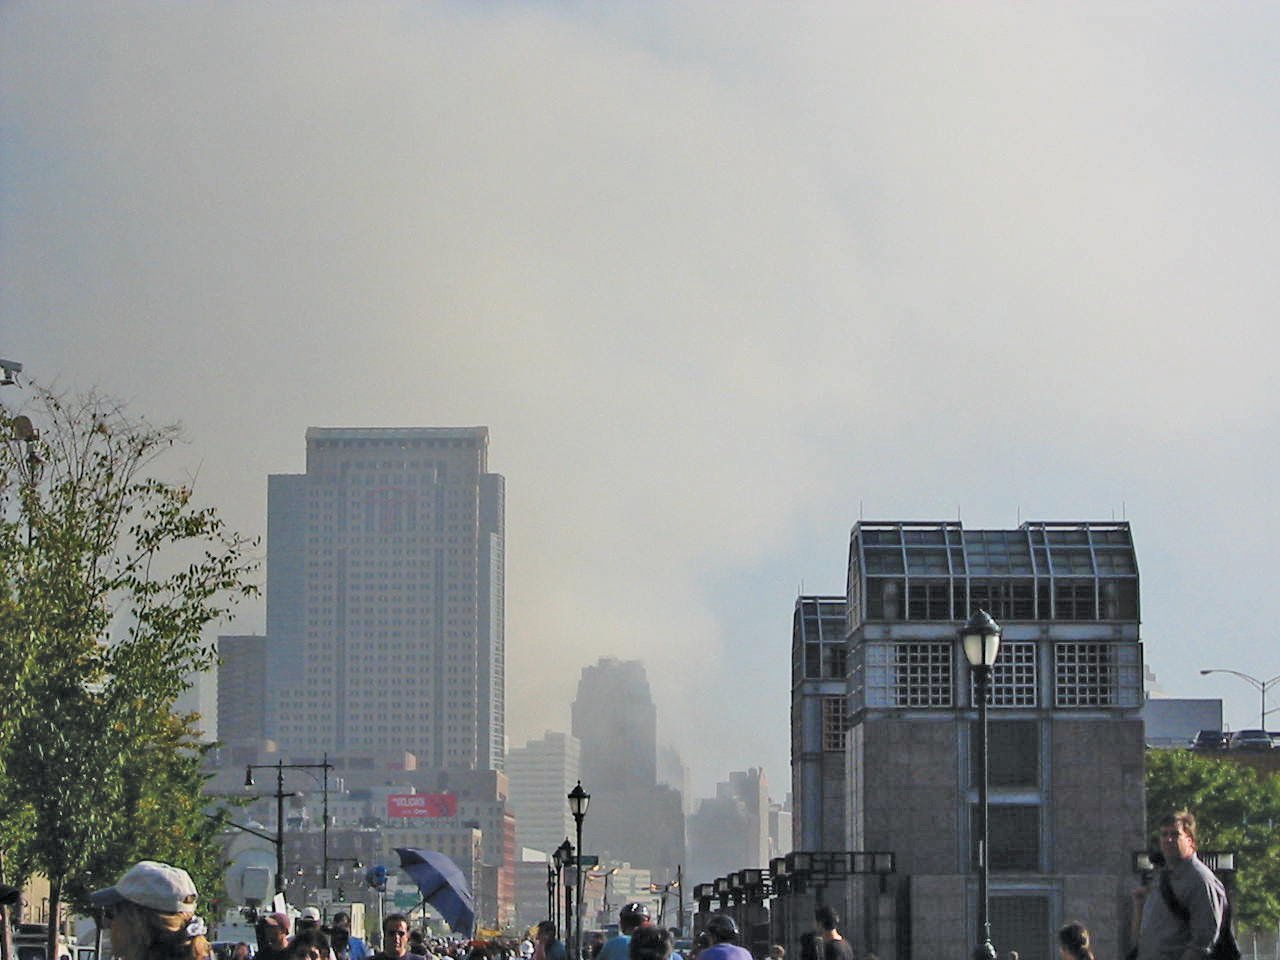 Smoke fills a changed skyline following the collapse of the World Trade Center towers in the Sept. 11, 2001 attacks.